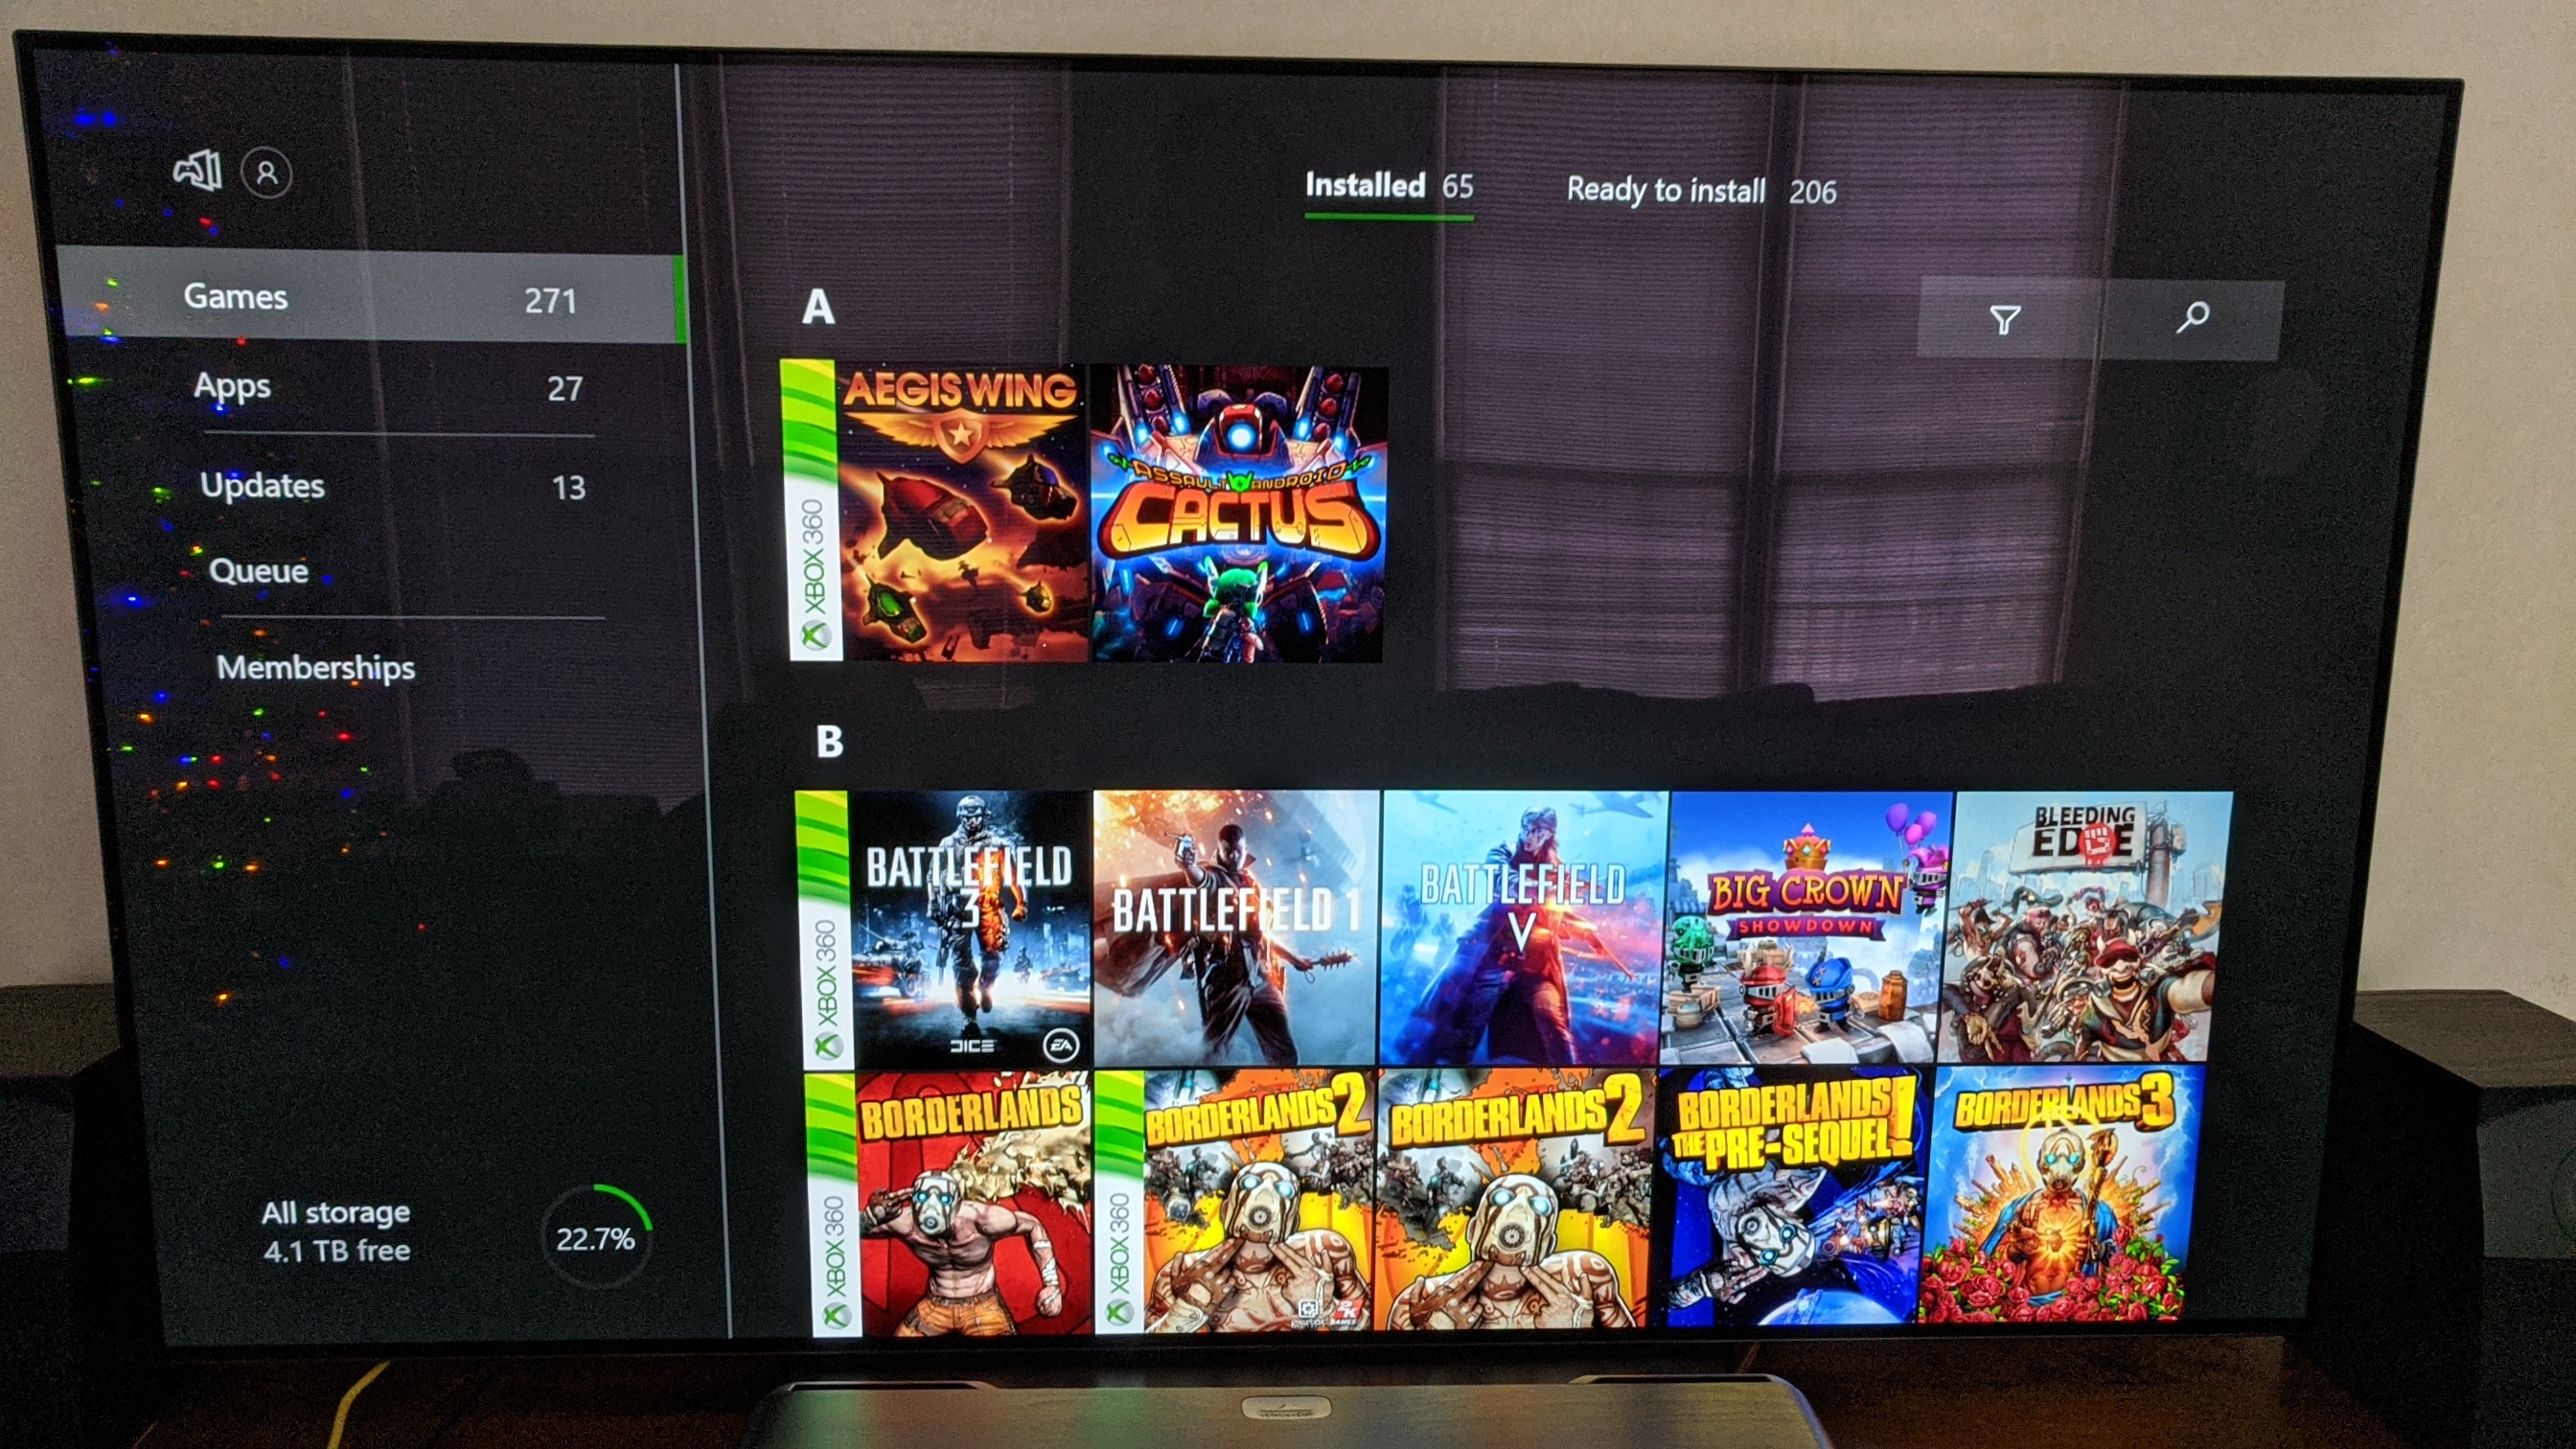 Extra Silicium Gevoel Xbox installed games not showing / missing - how to fix? - Microsoft  Community